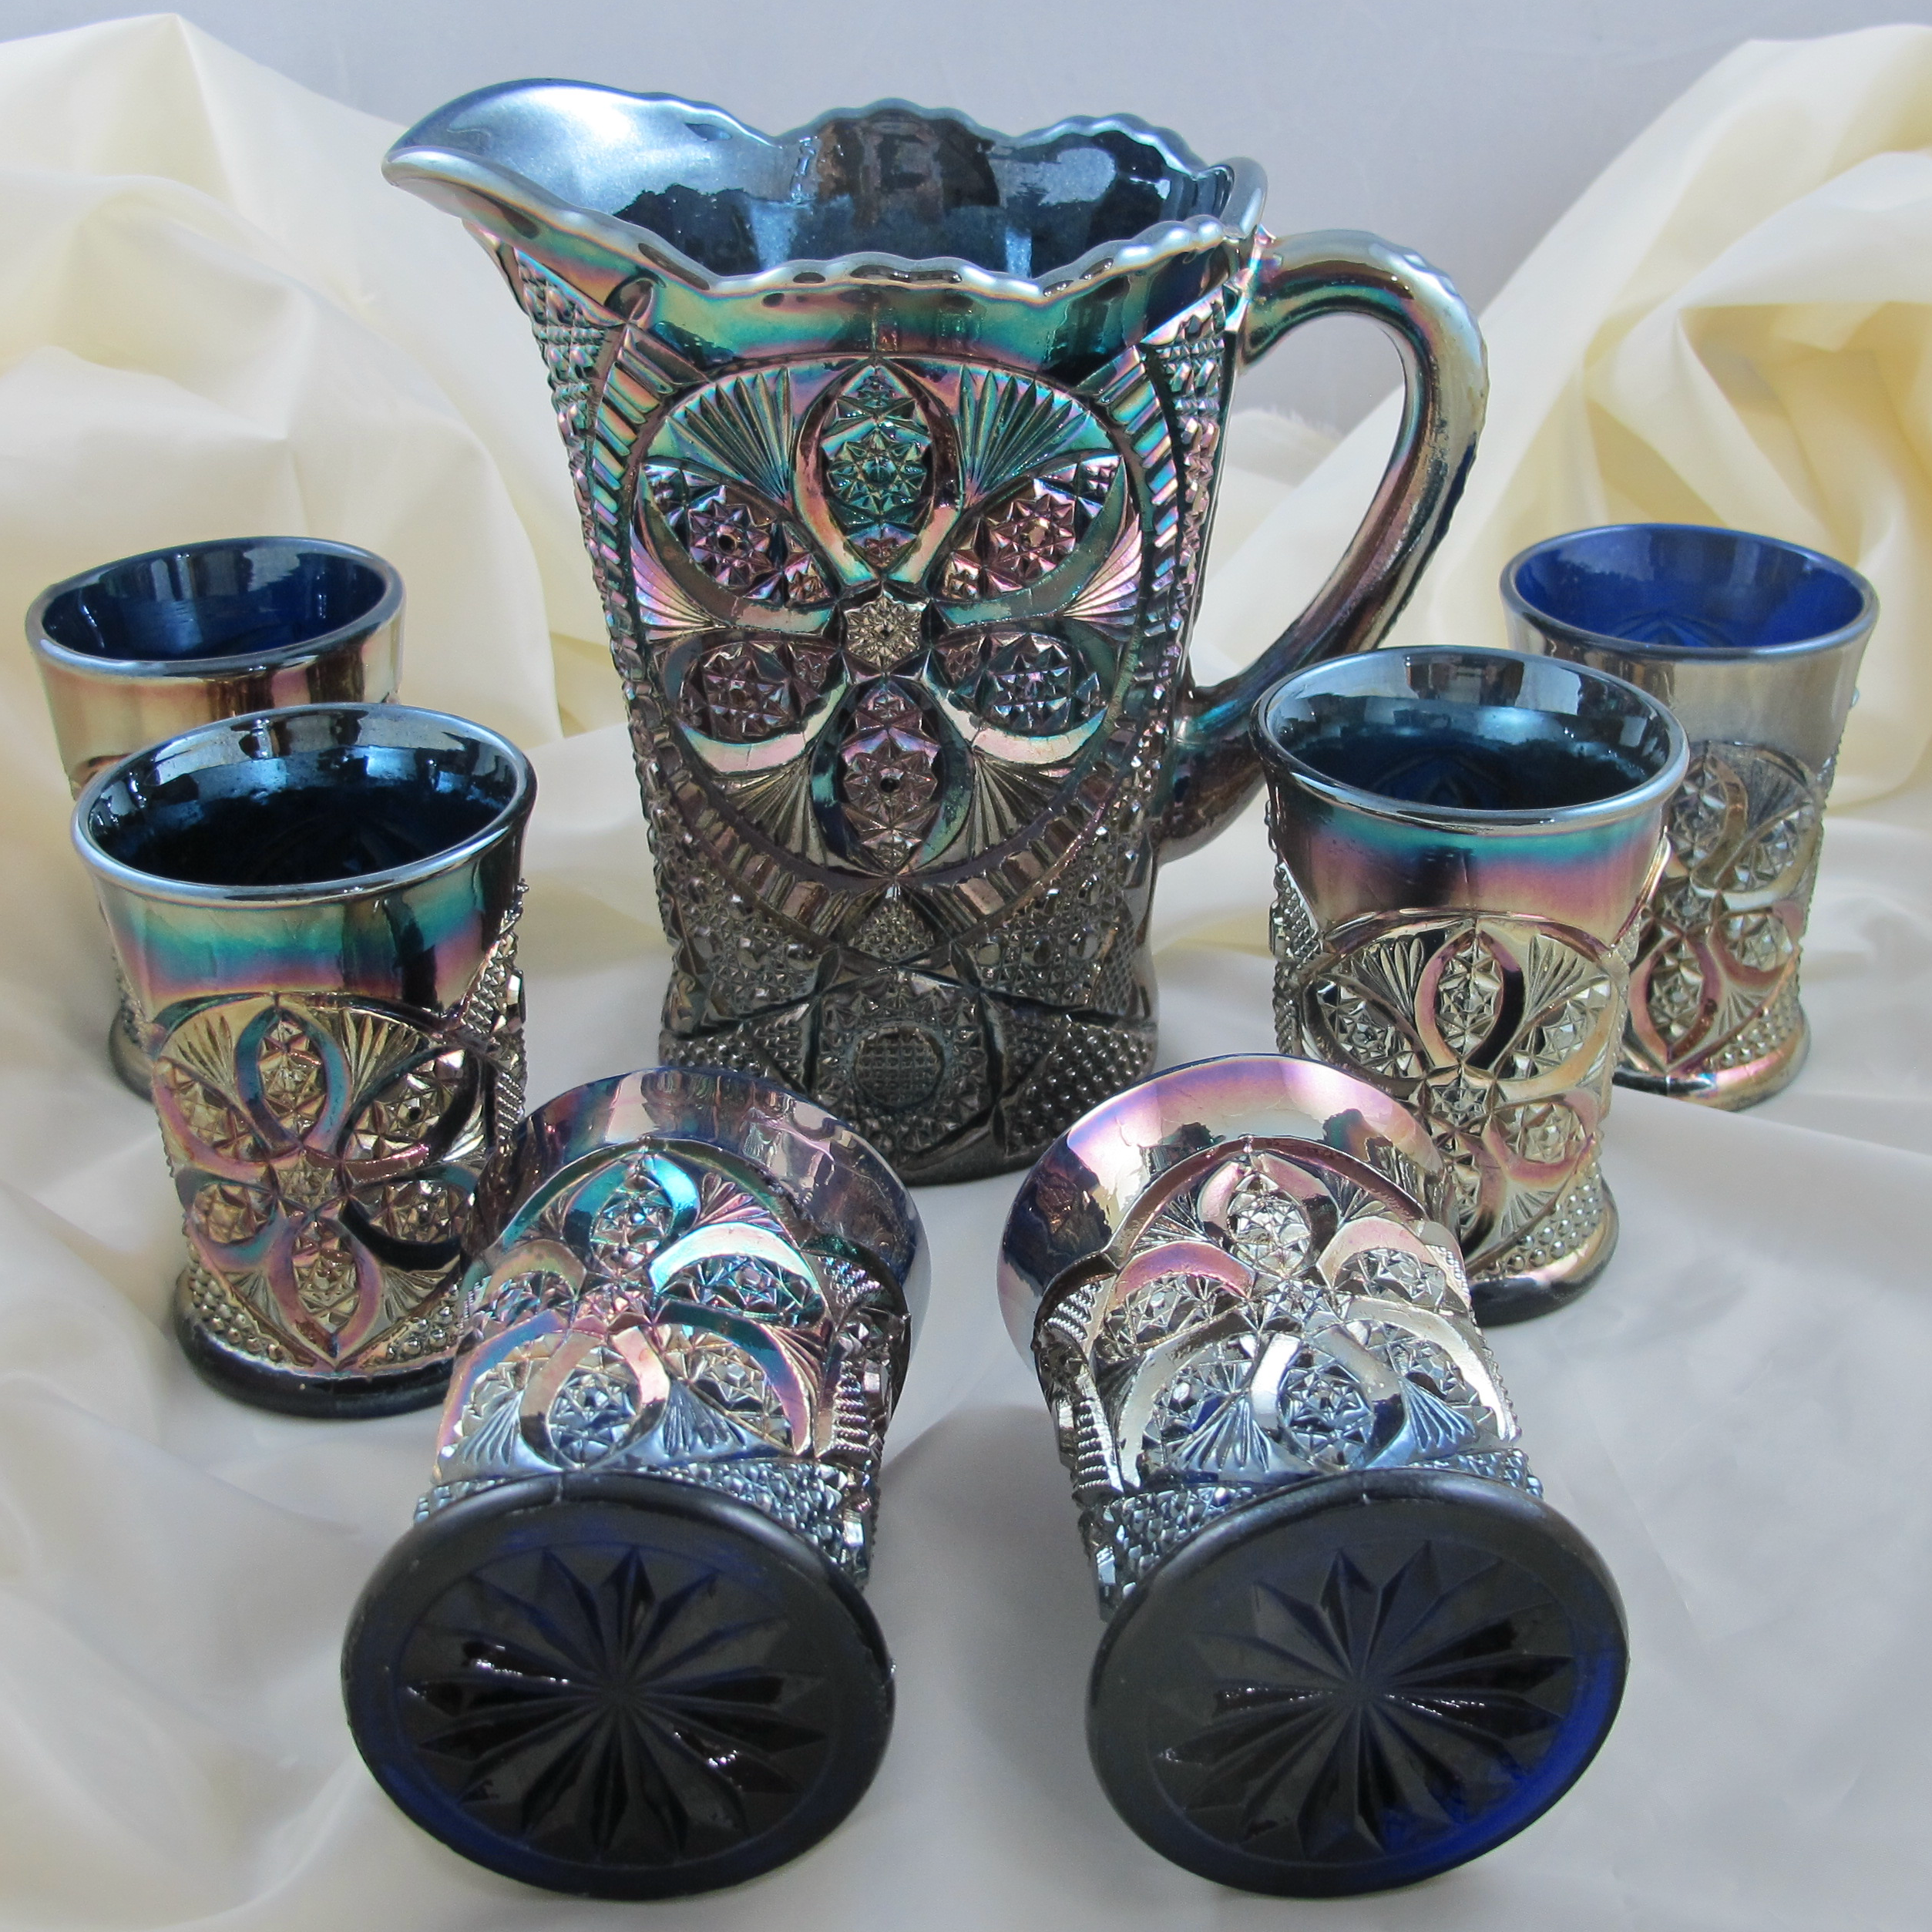 Contemporary Carnival Glass Water Sets and Pitchers